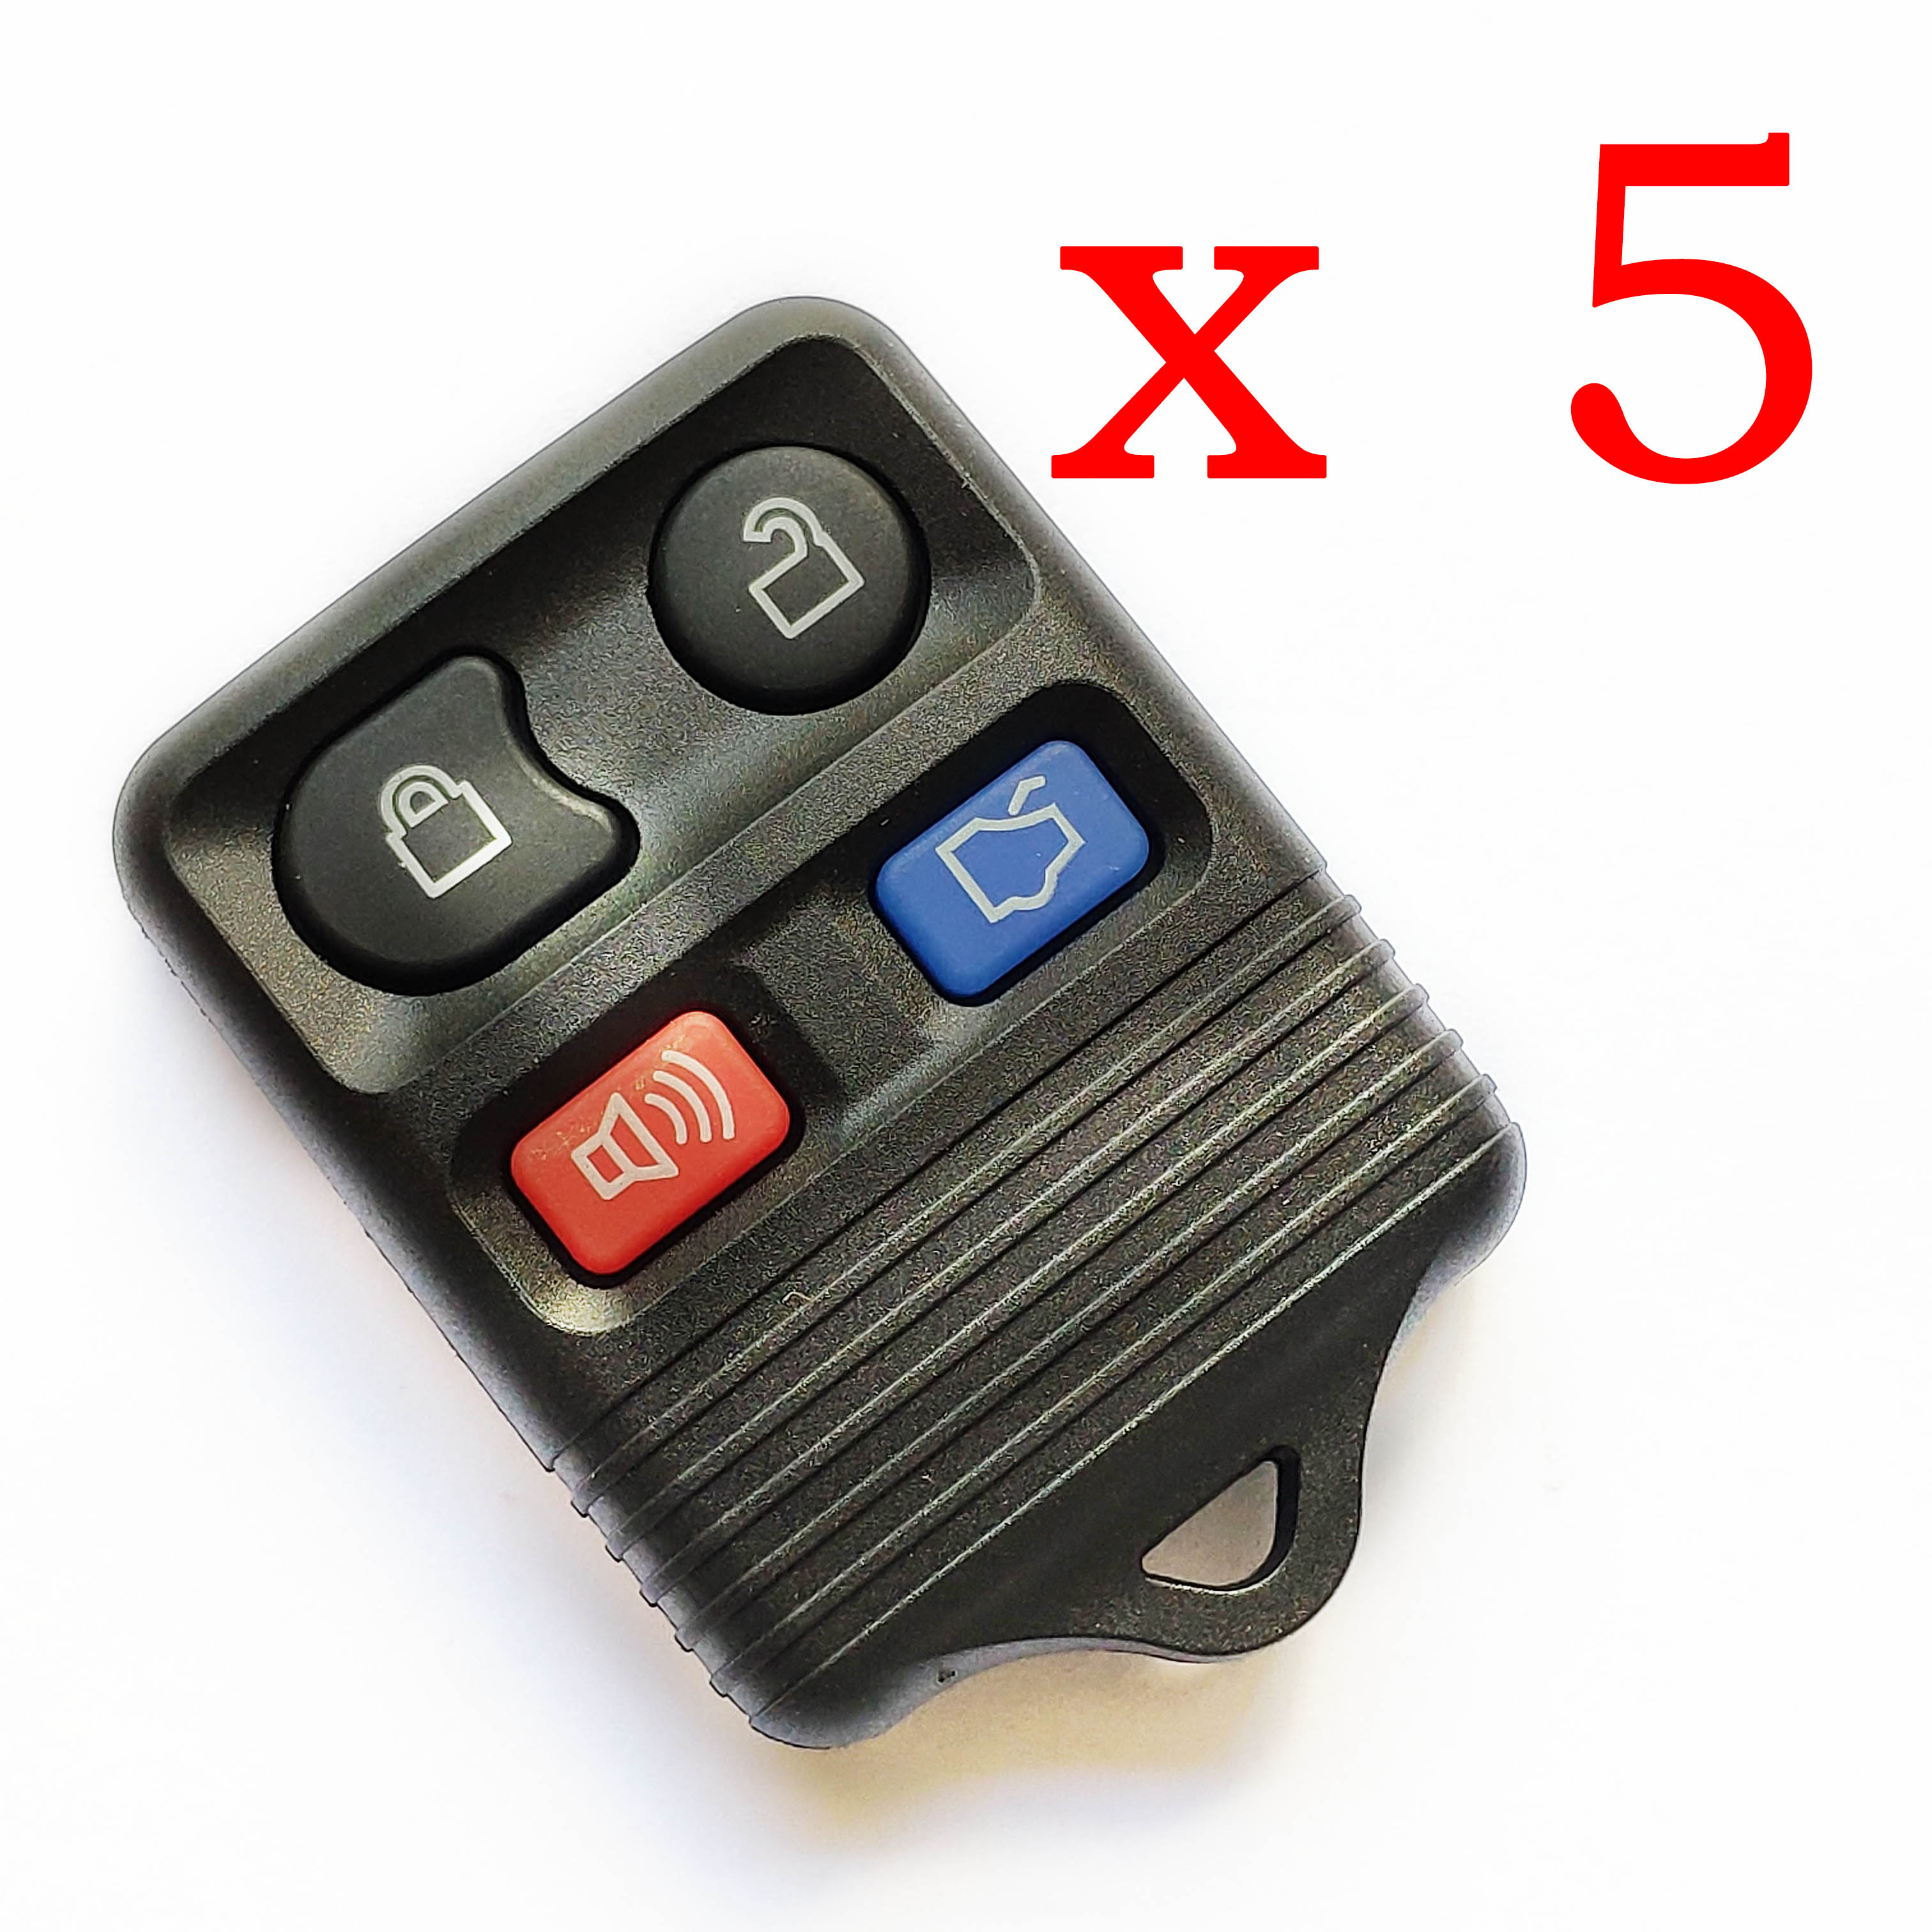 5 pieces Xhorse VVDI 4 Buttons Ford Type Universal Remote Control 